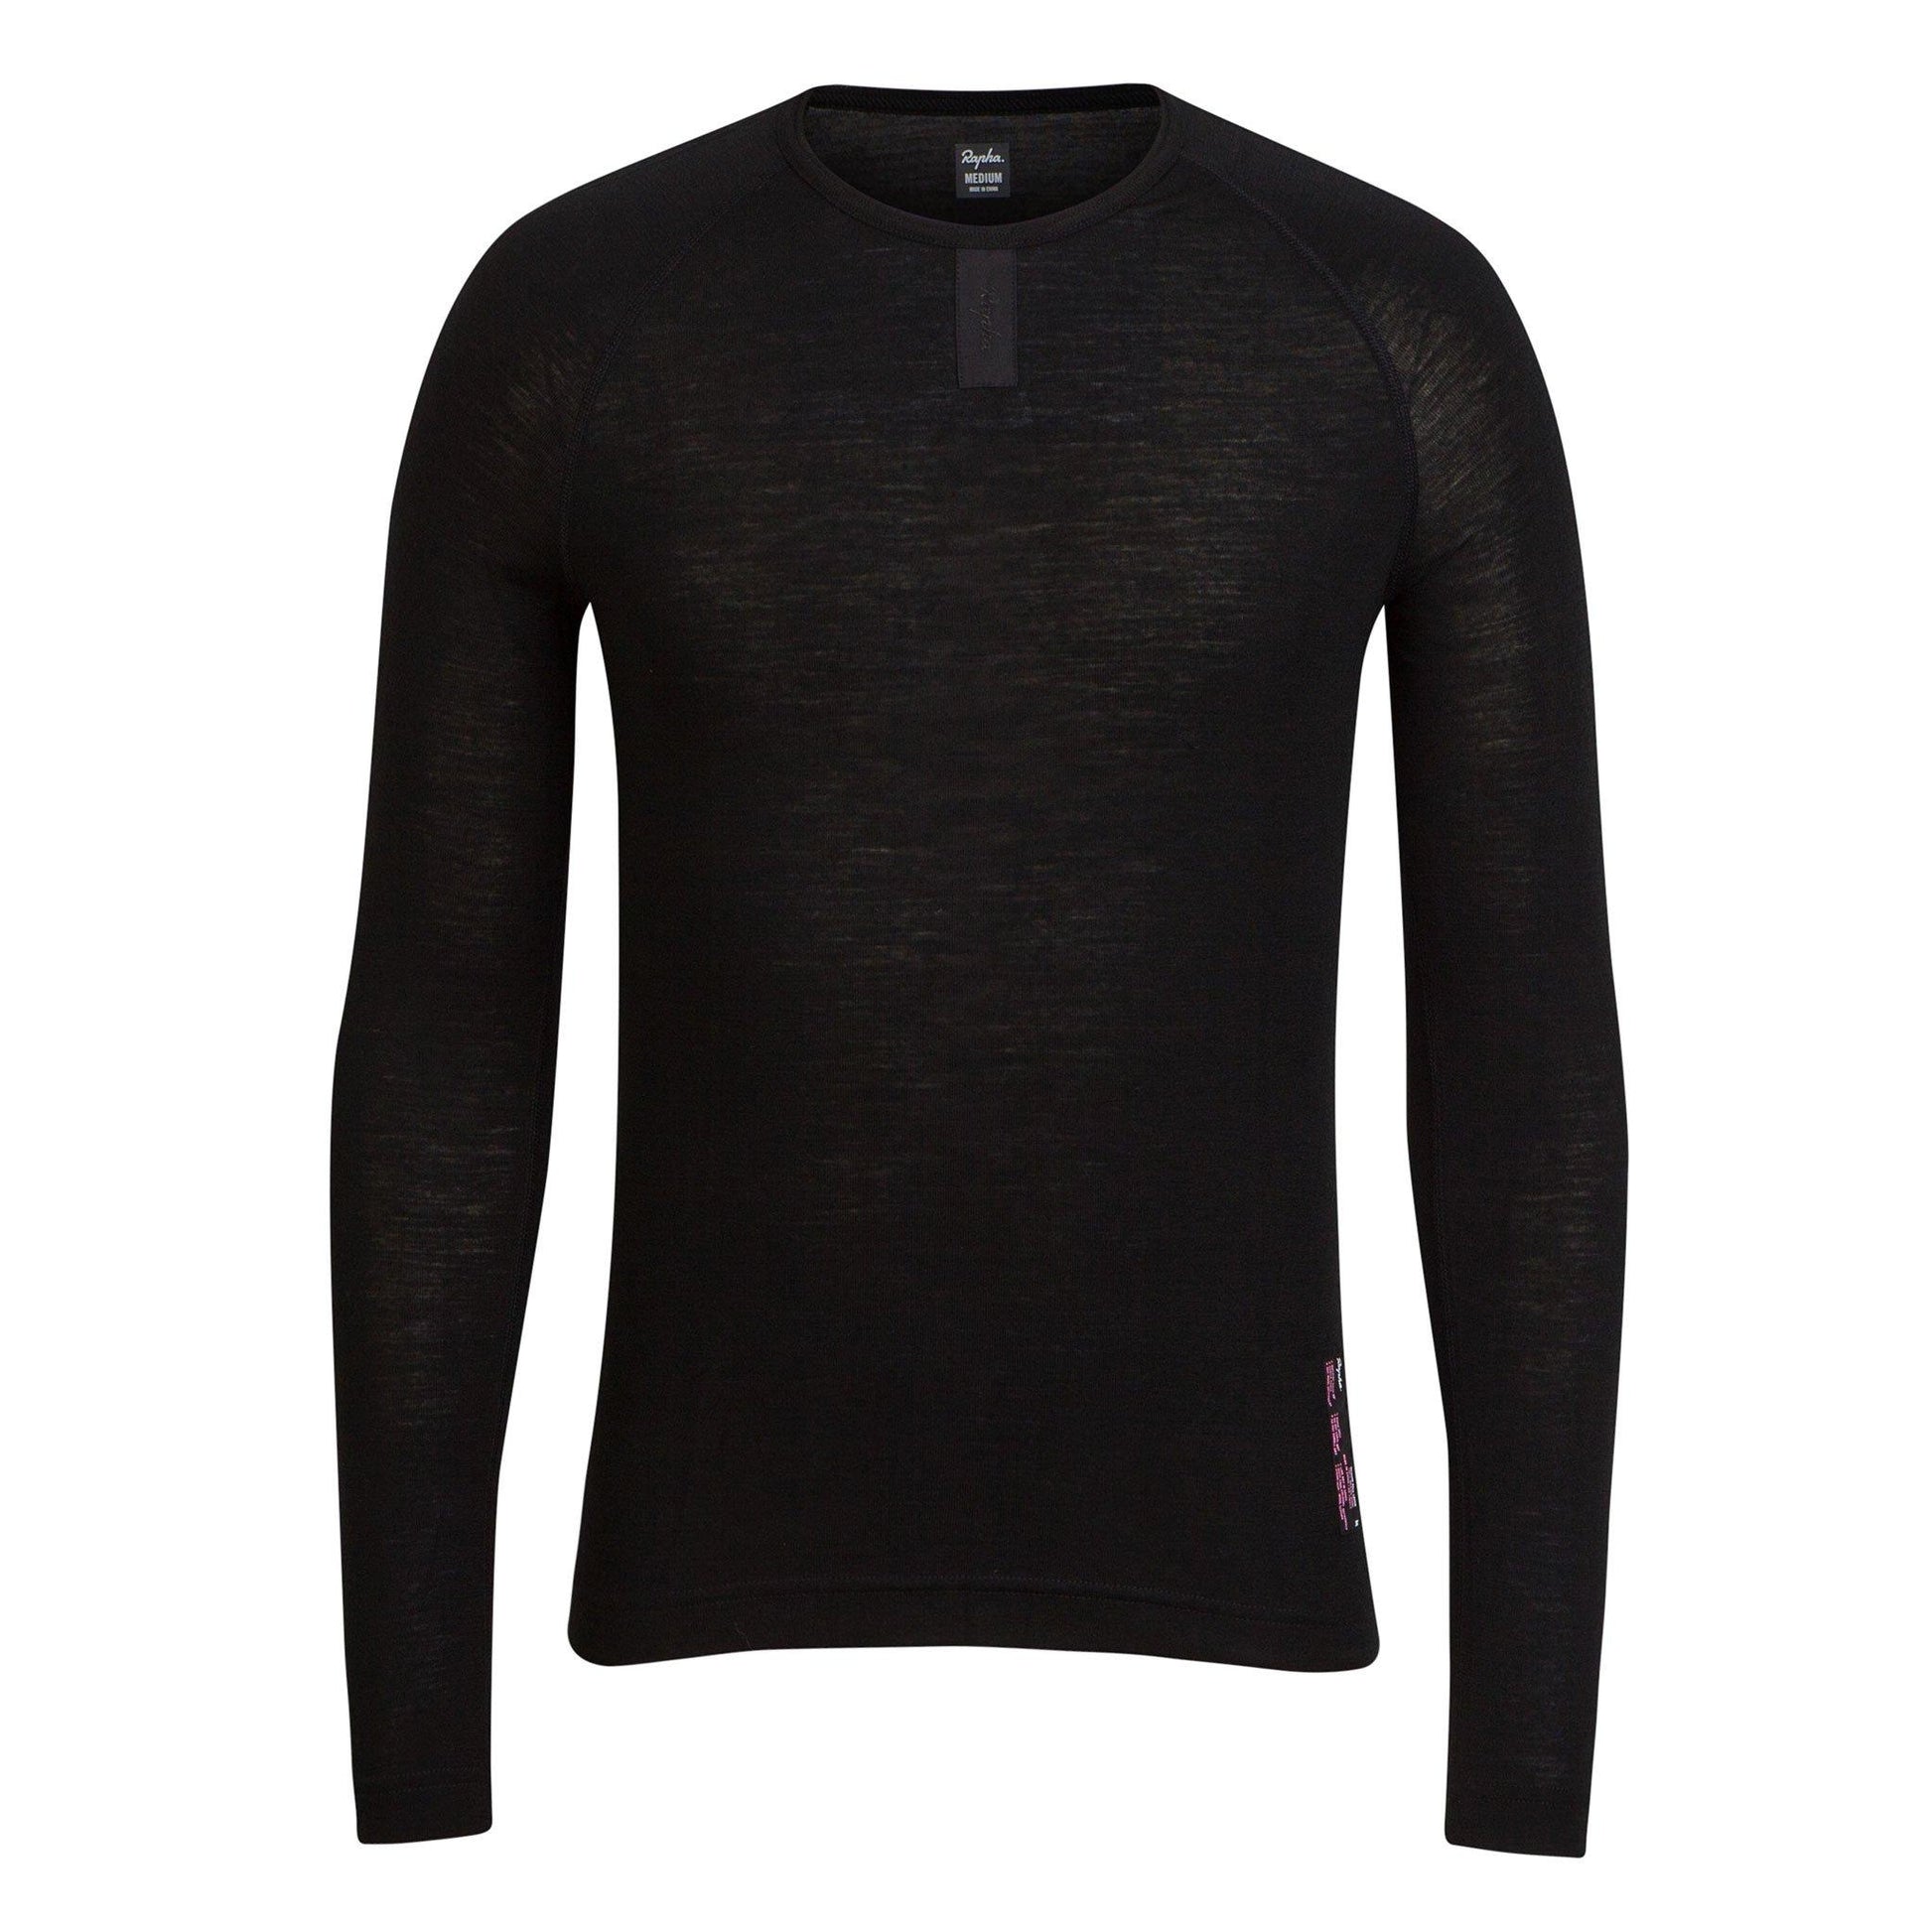 Rapha Mens Merino Long Sleeve Base Layer - Black buy online at Woolys Wheels Cyclery Sydney with free delivery